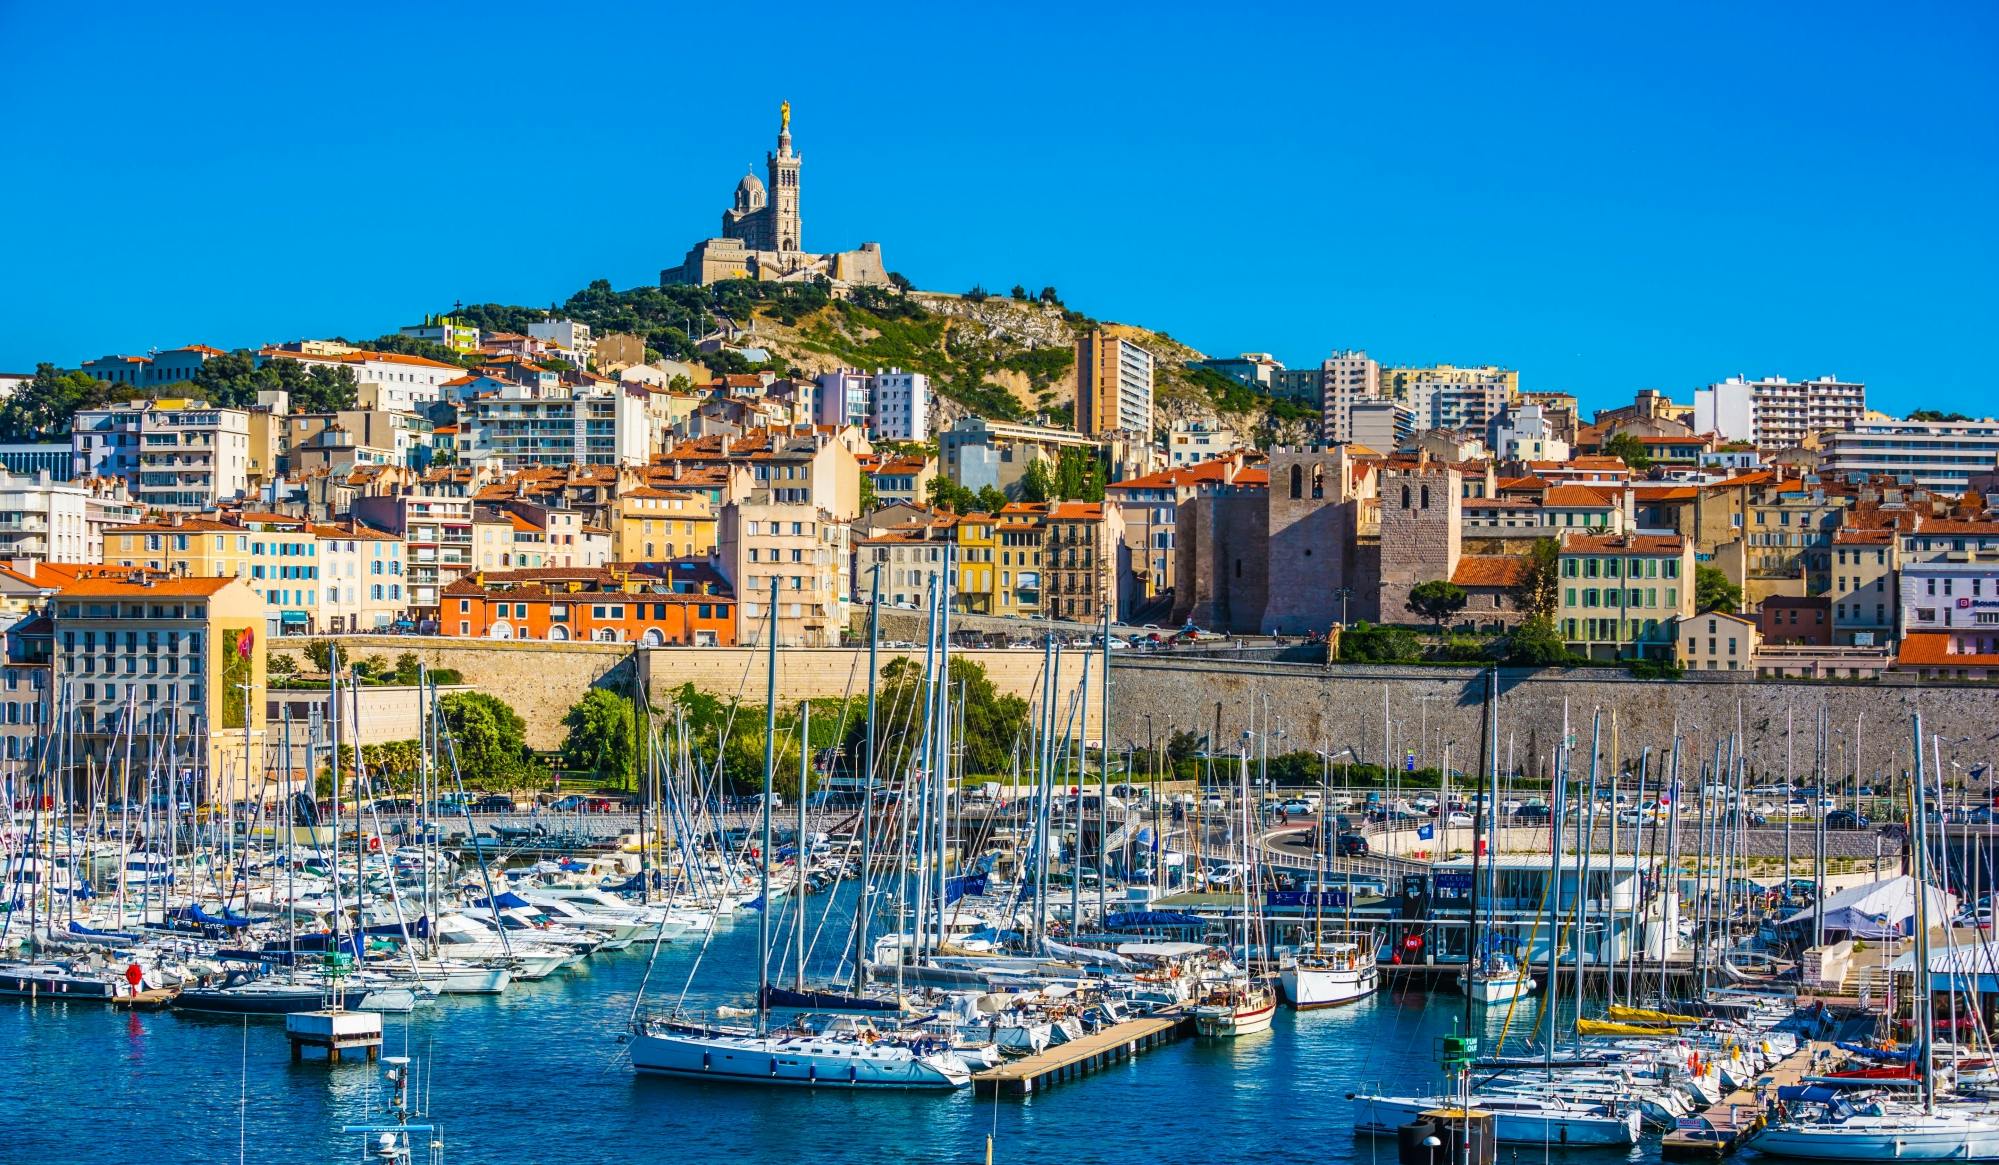 Guided walking tour of Marseille